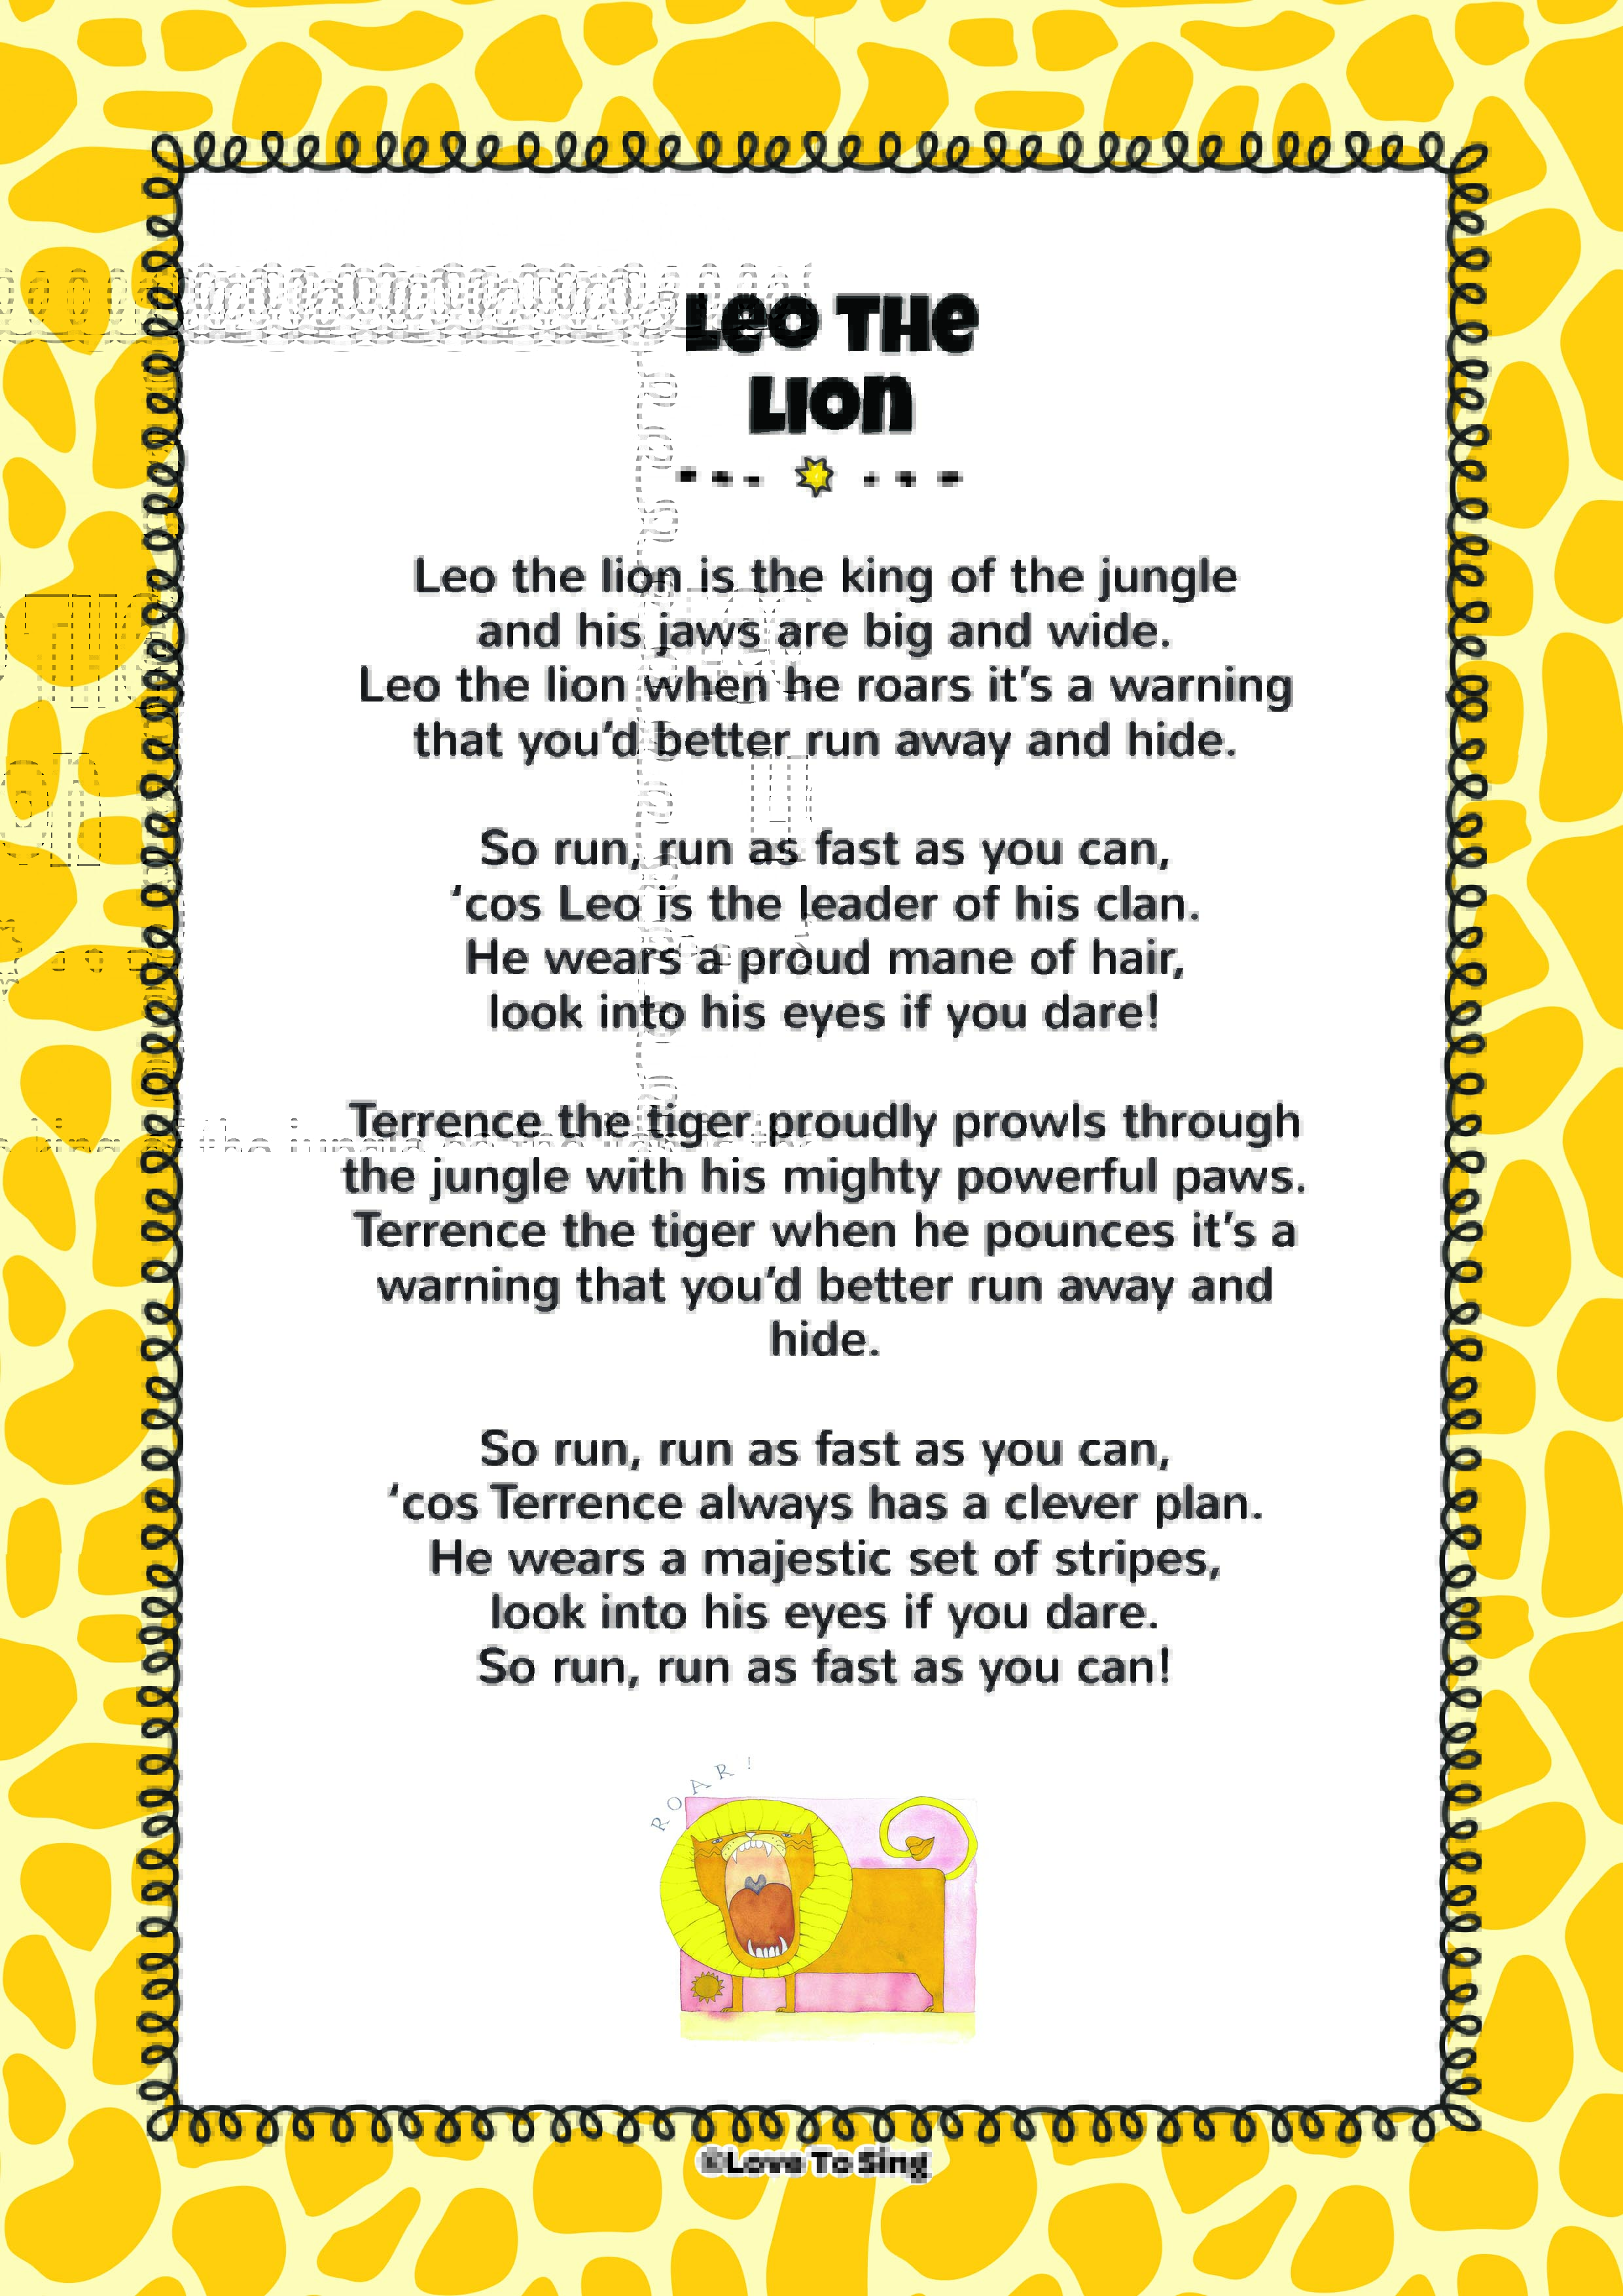 Leo the Lion Animal Song | FREE Video Song, Lyrics & Activities